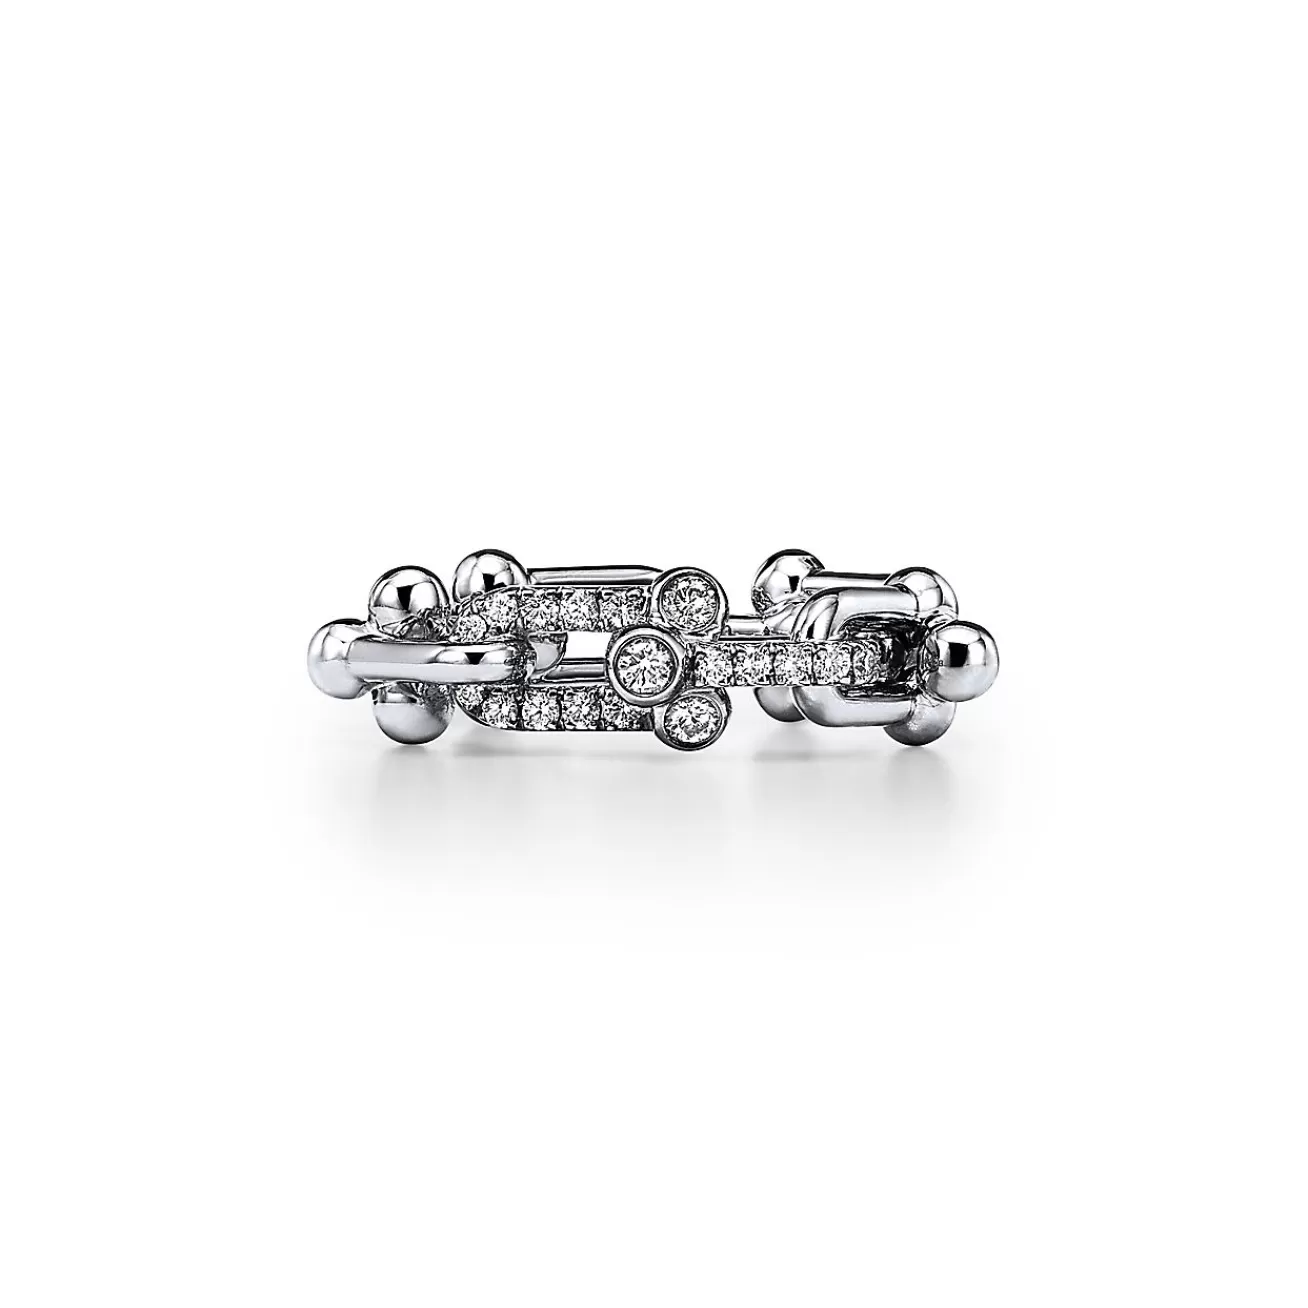 Tiffany & Co. Tiffany HardWear Small Link Ring in White Gold with Diamonds | ^ Rings | Men's Jewelry